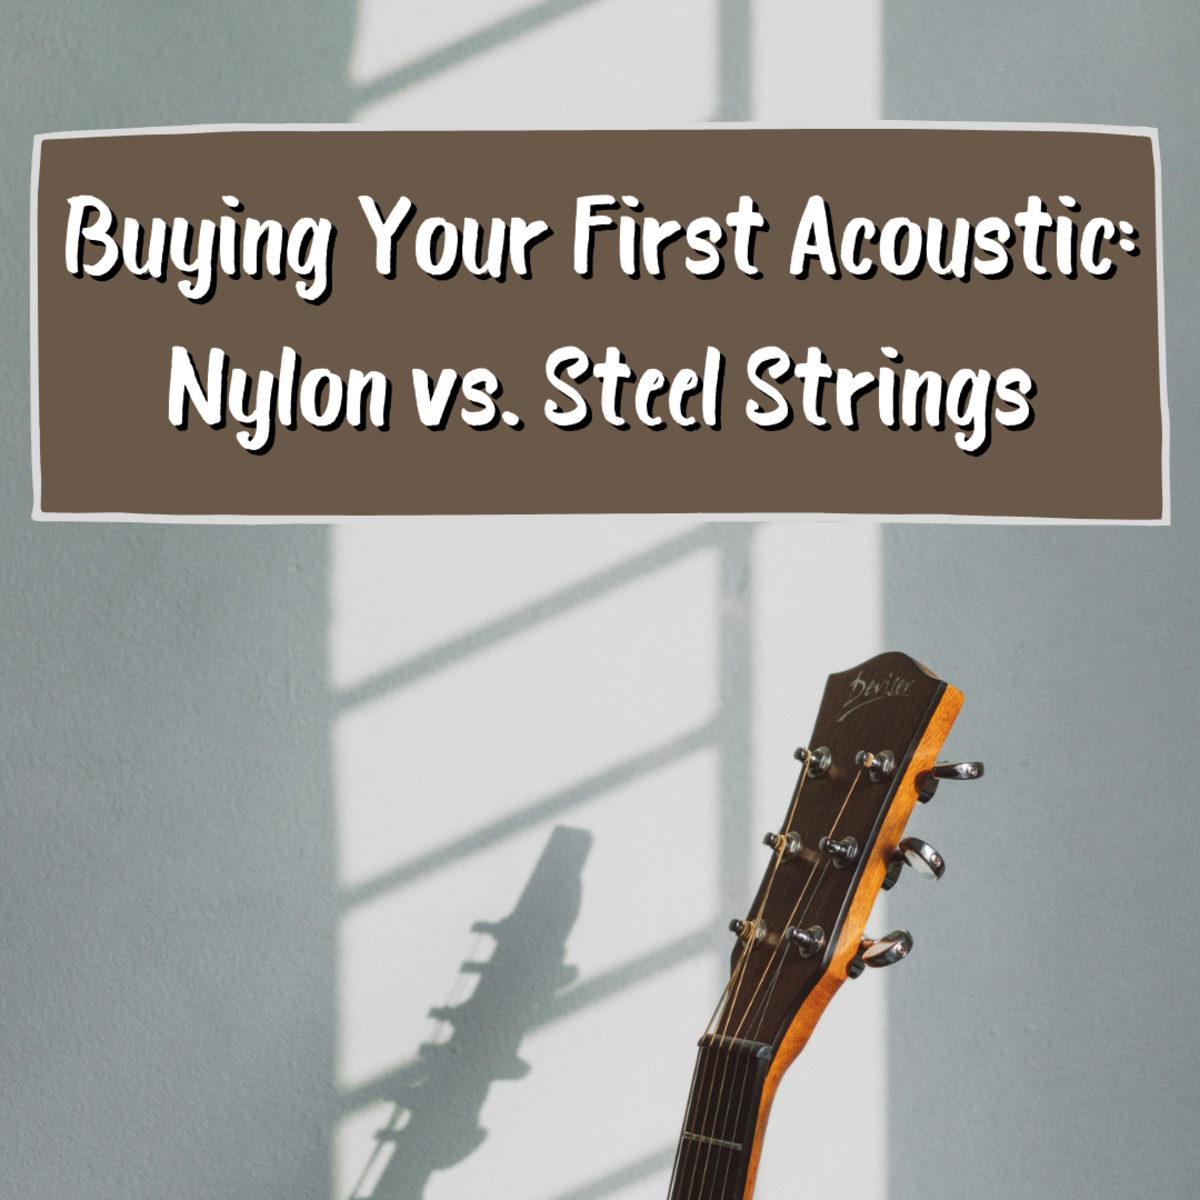 When purchasing your first acoustic guitar it is important to consider nylon vs steel strings. This article will help you make an informed decision.